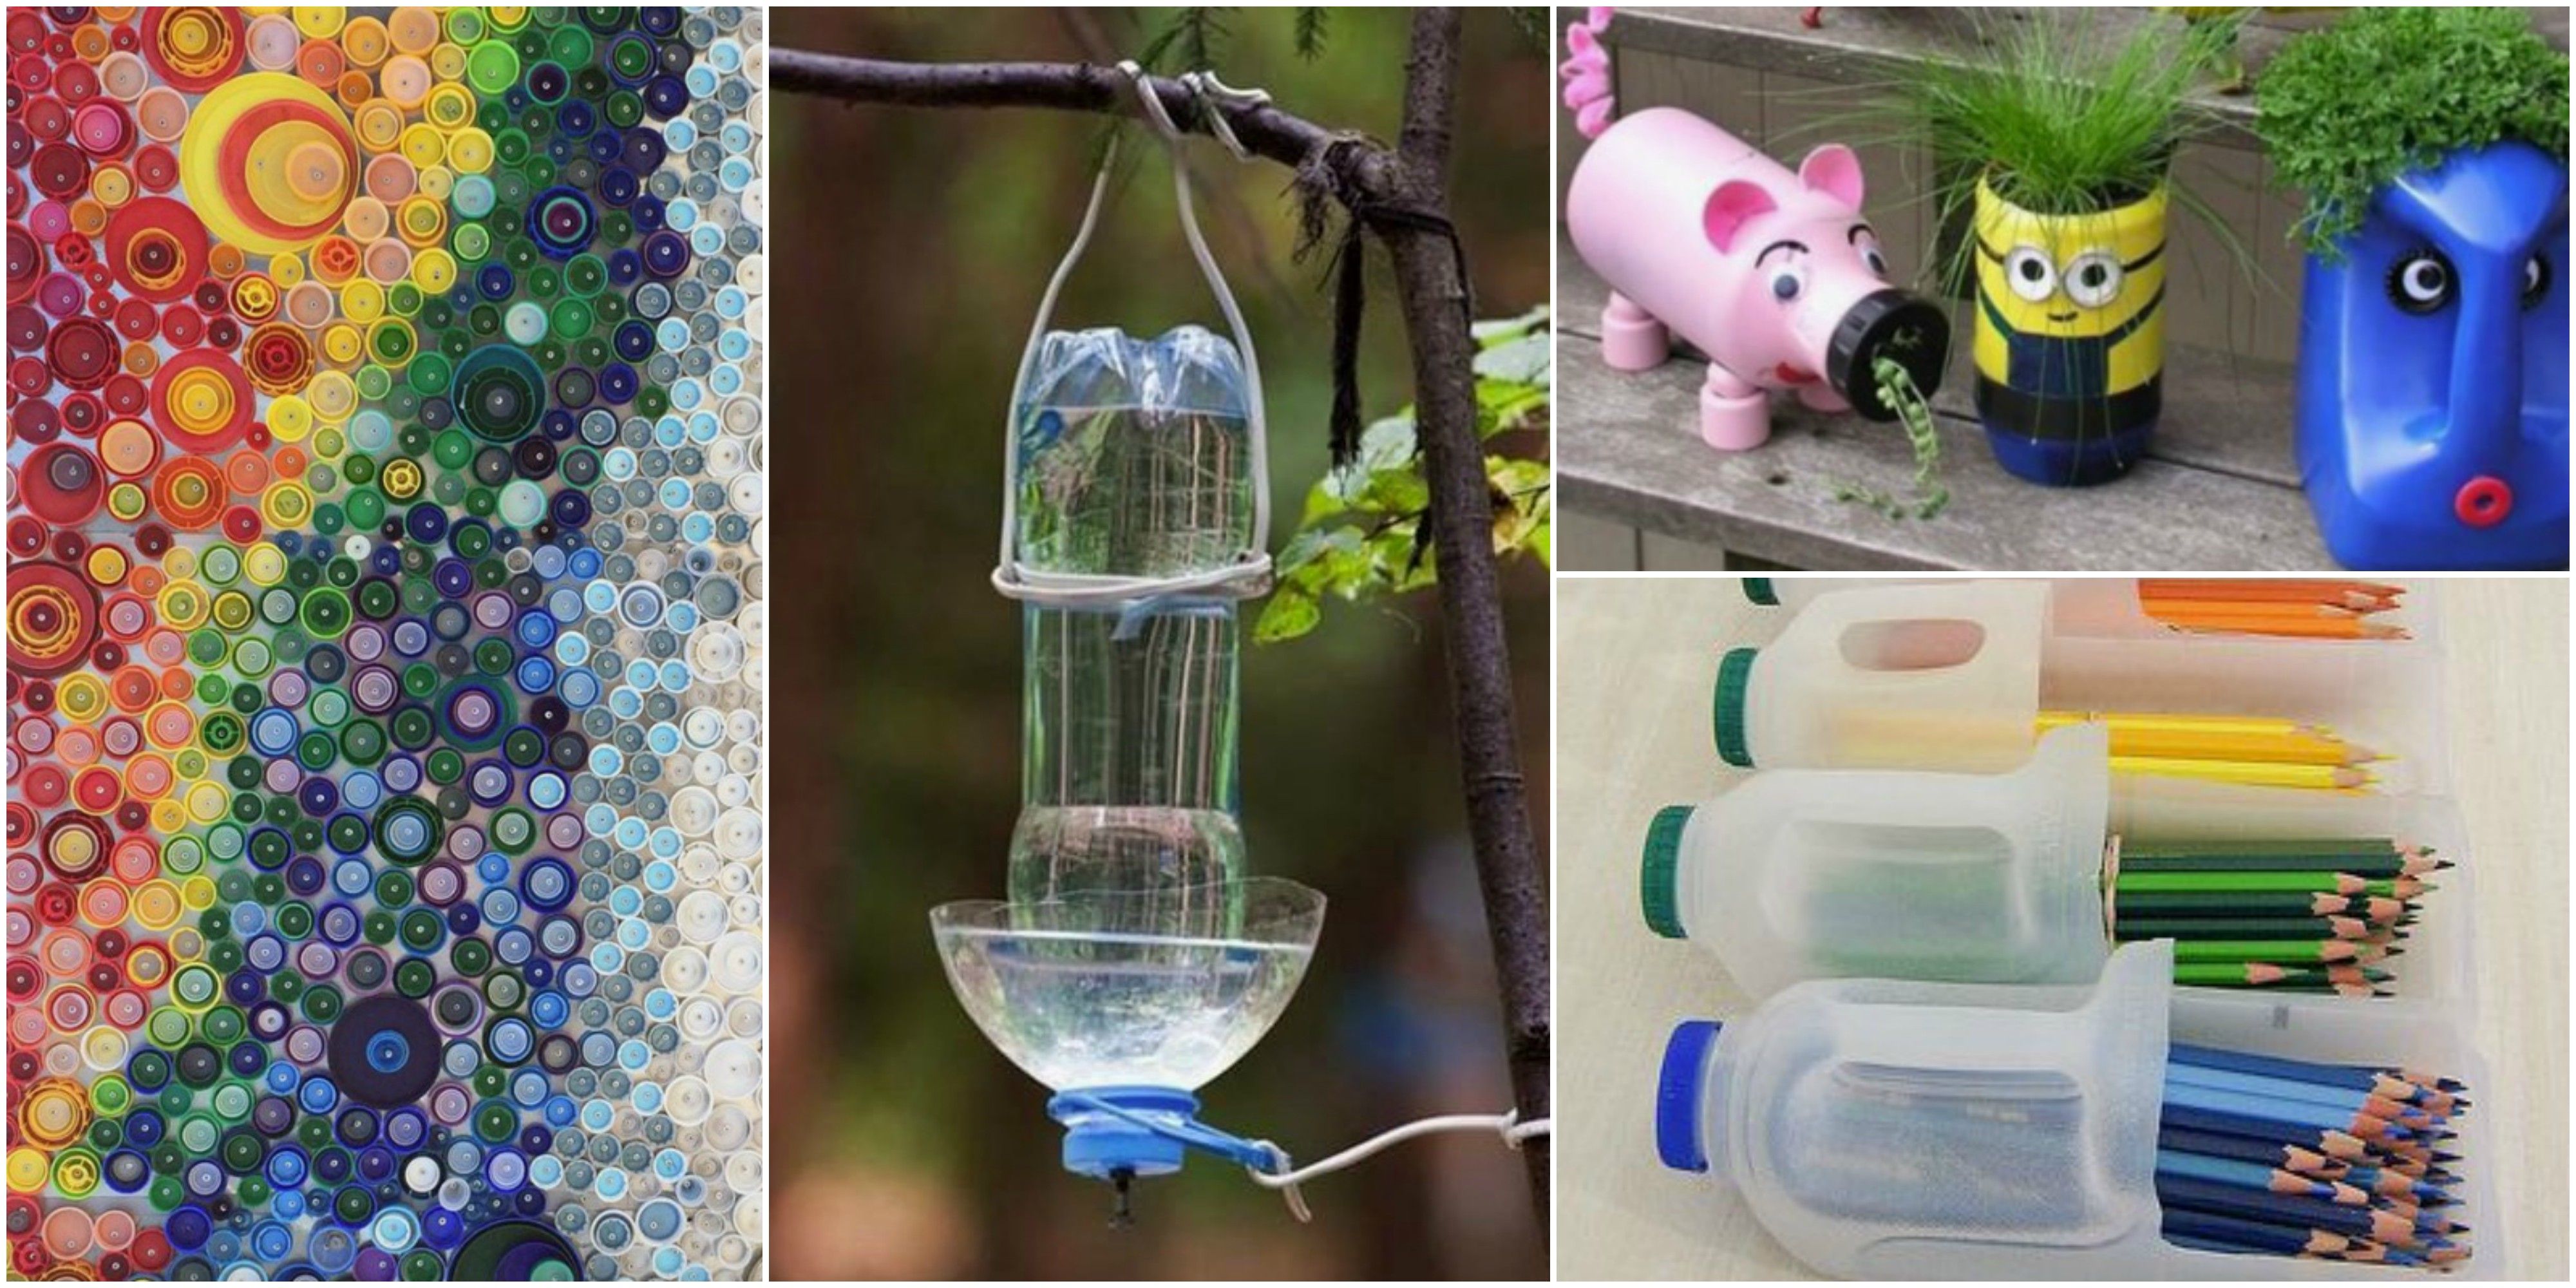 7 Smart and Useful Ways to Reuse Plastic Containers